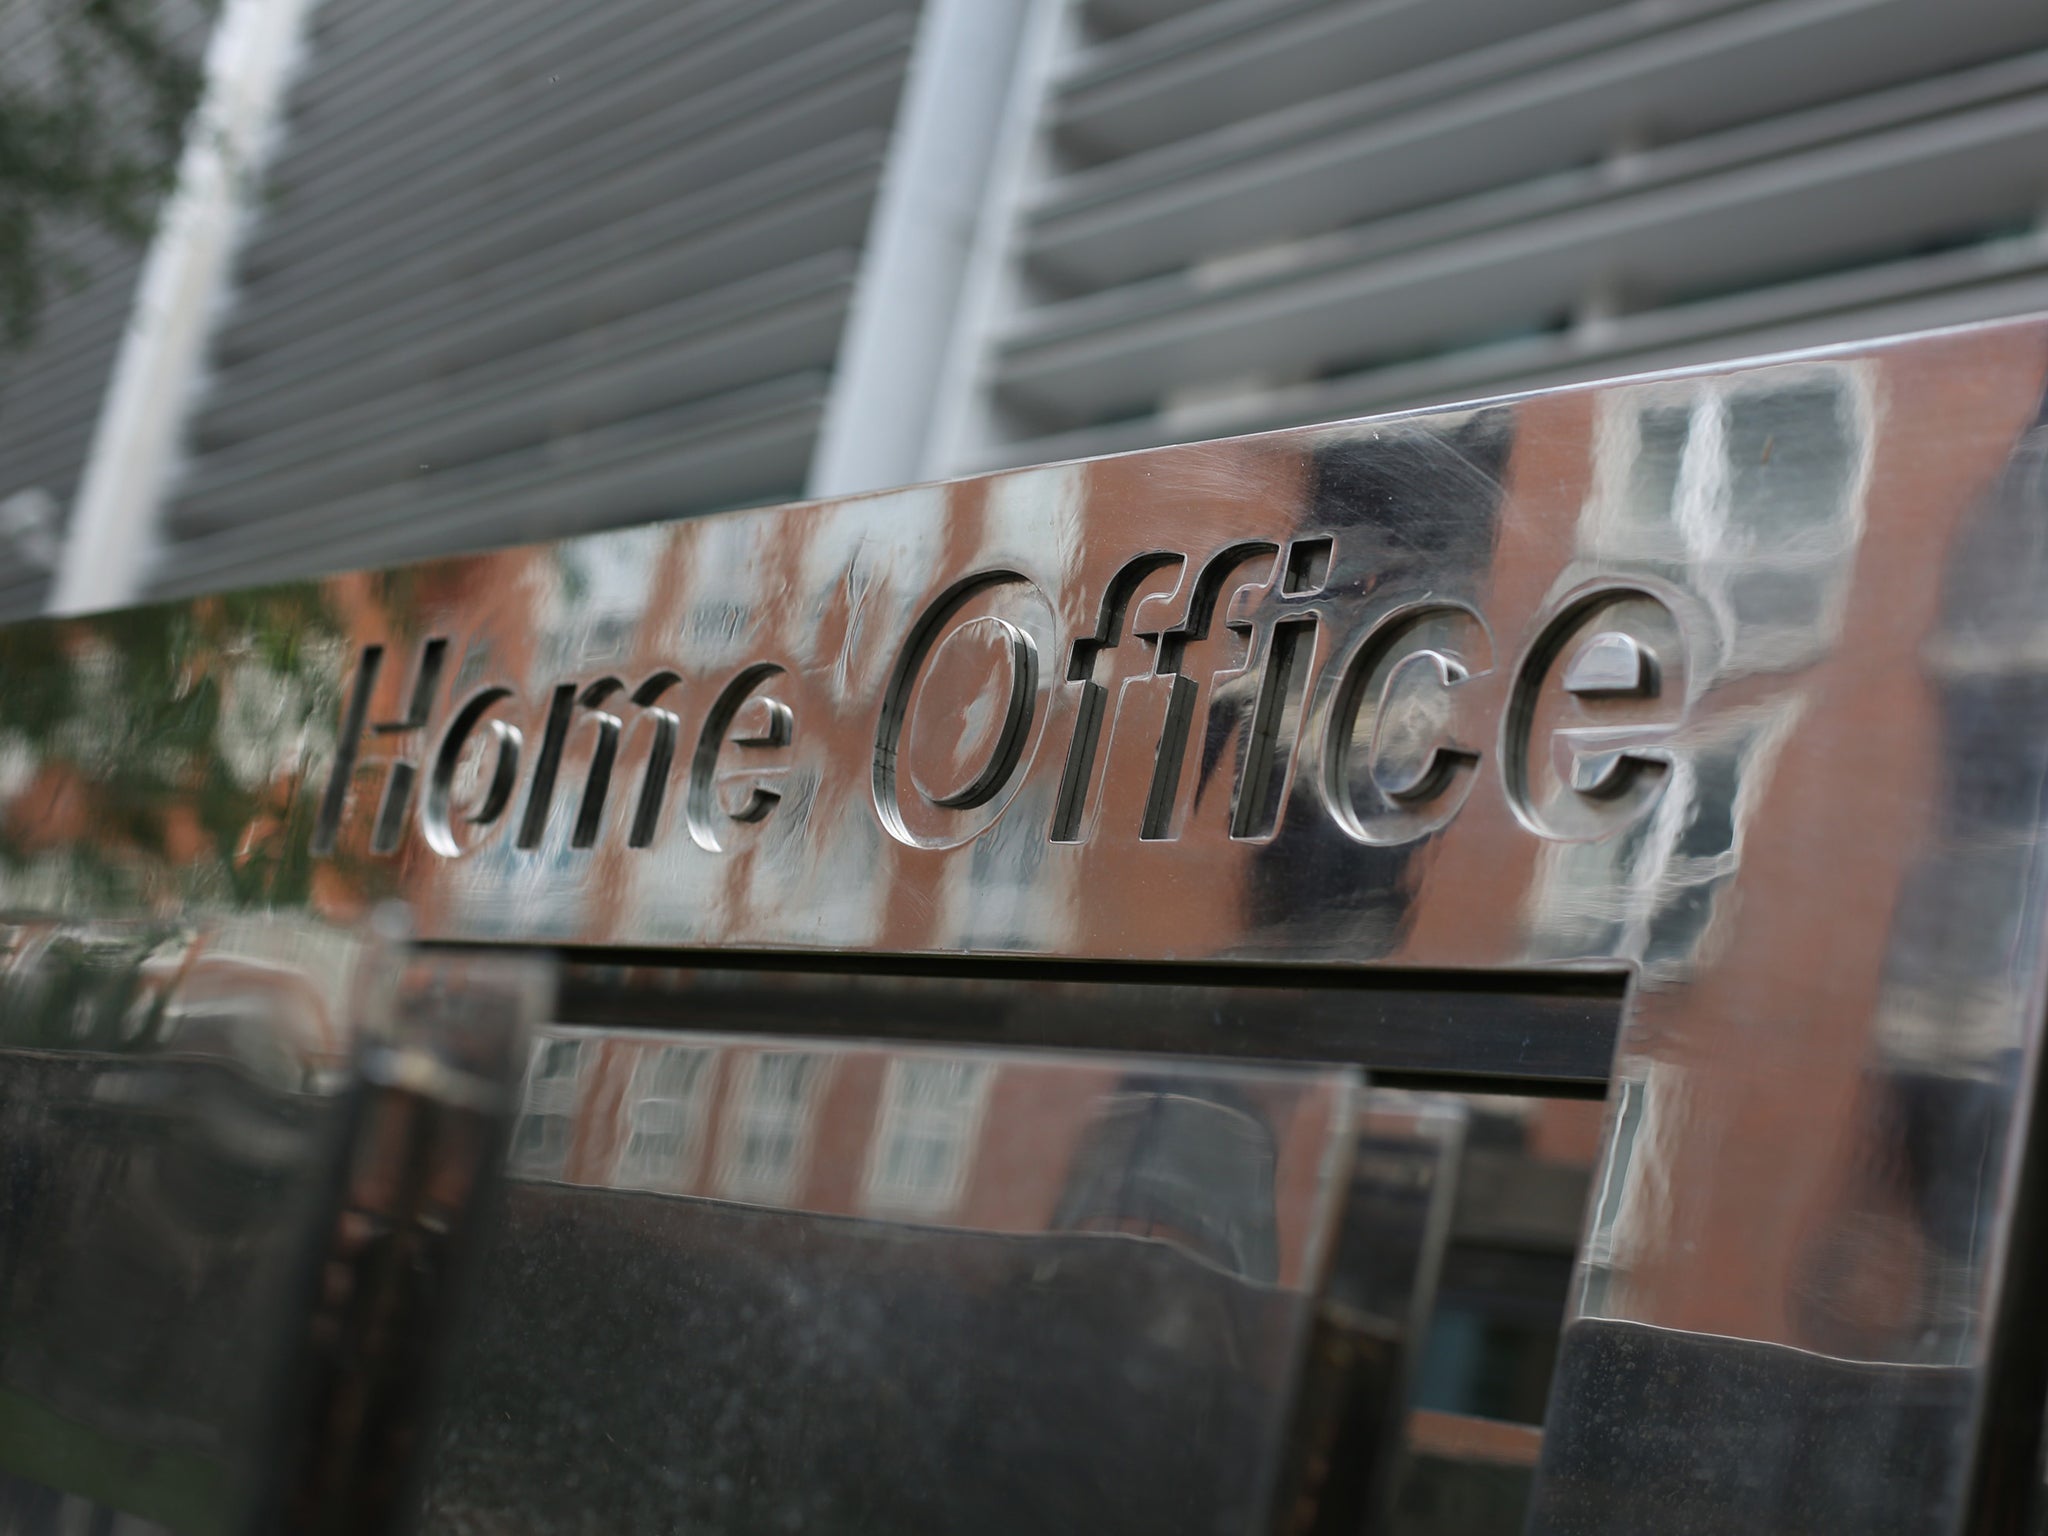 The Refugee Council has now called on the Home Secretary to reverse the decision to begin evicting refugees from asylum accommodation while the ban on evicting private and social tenants remains in place, saying this was 'unacceptable' even in normal time